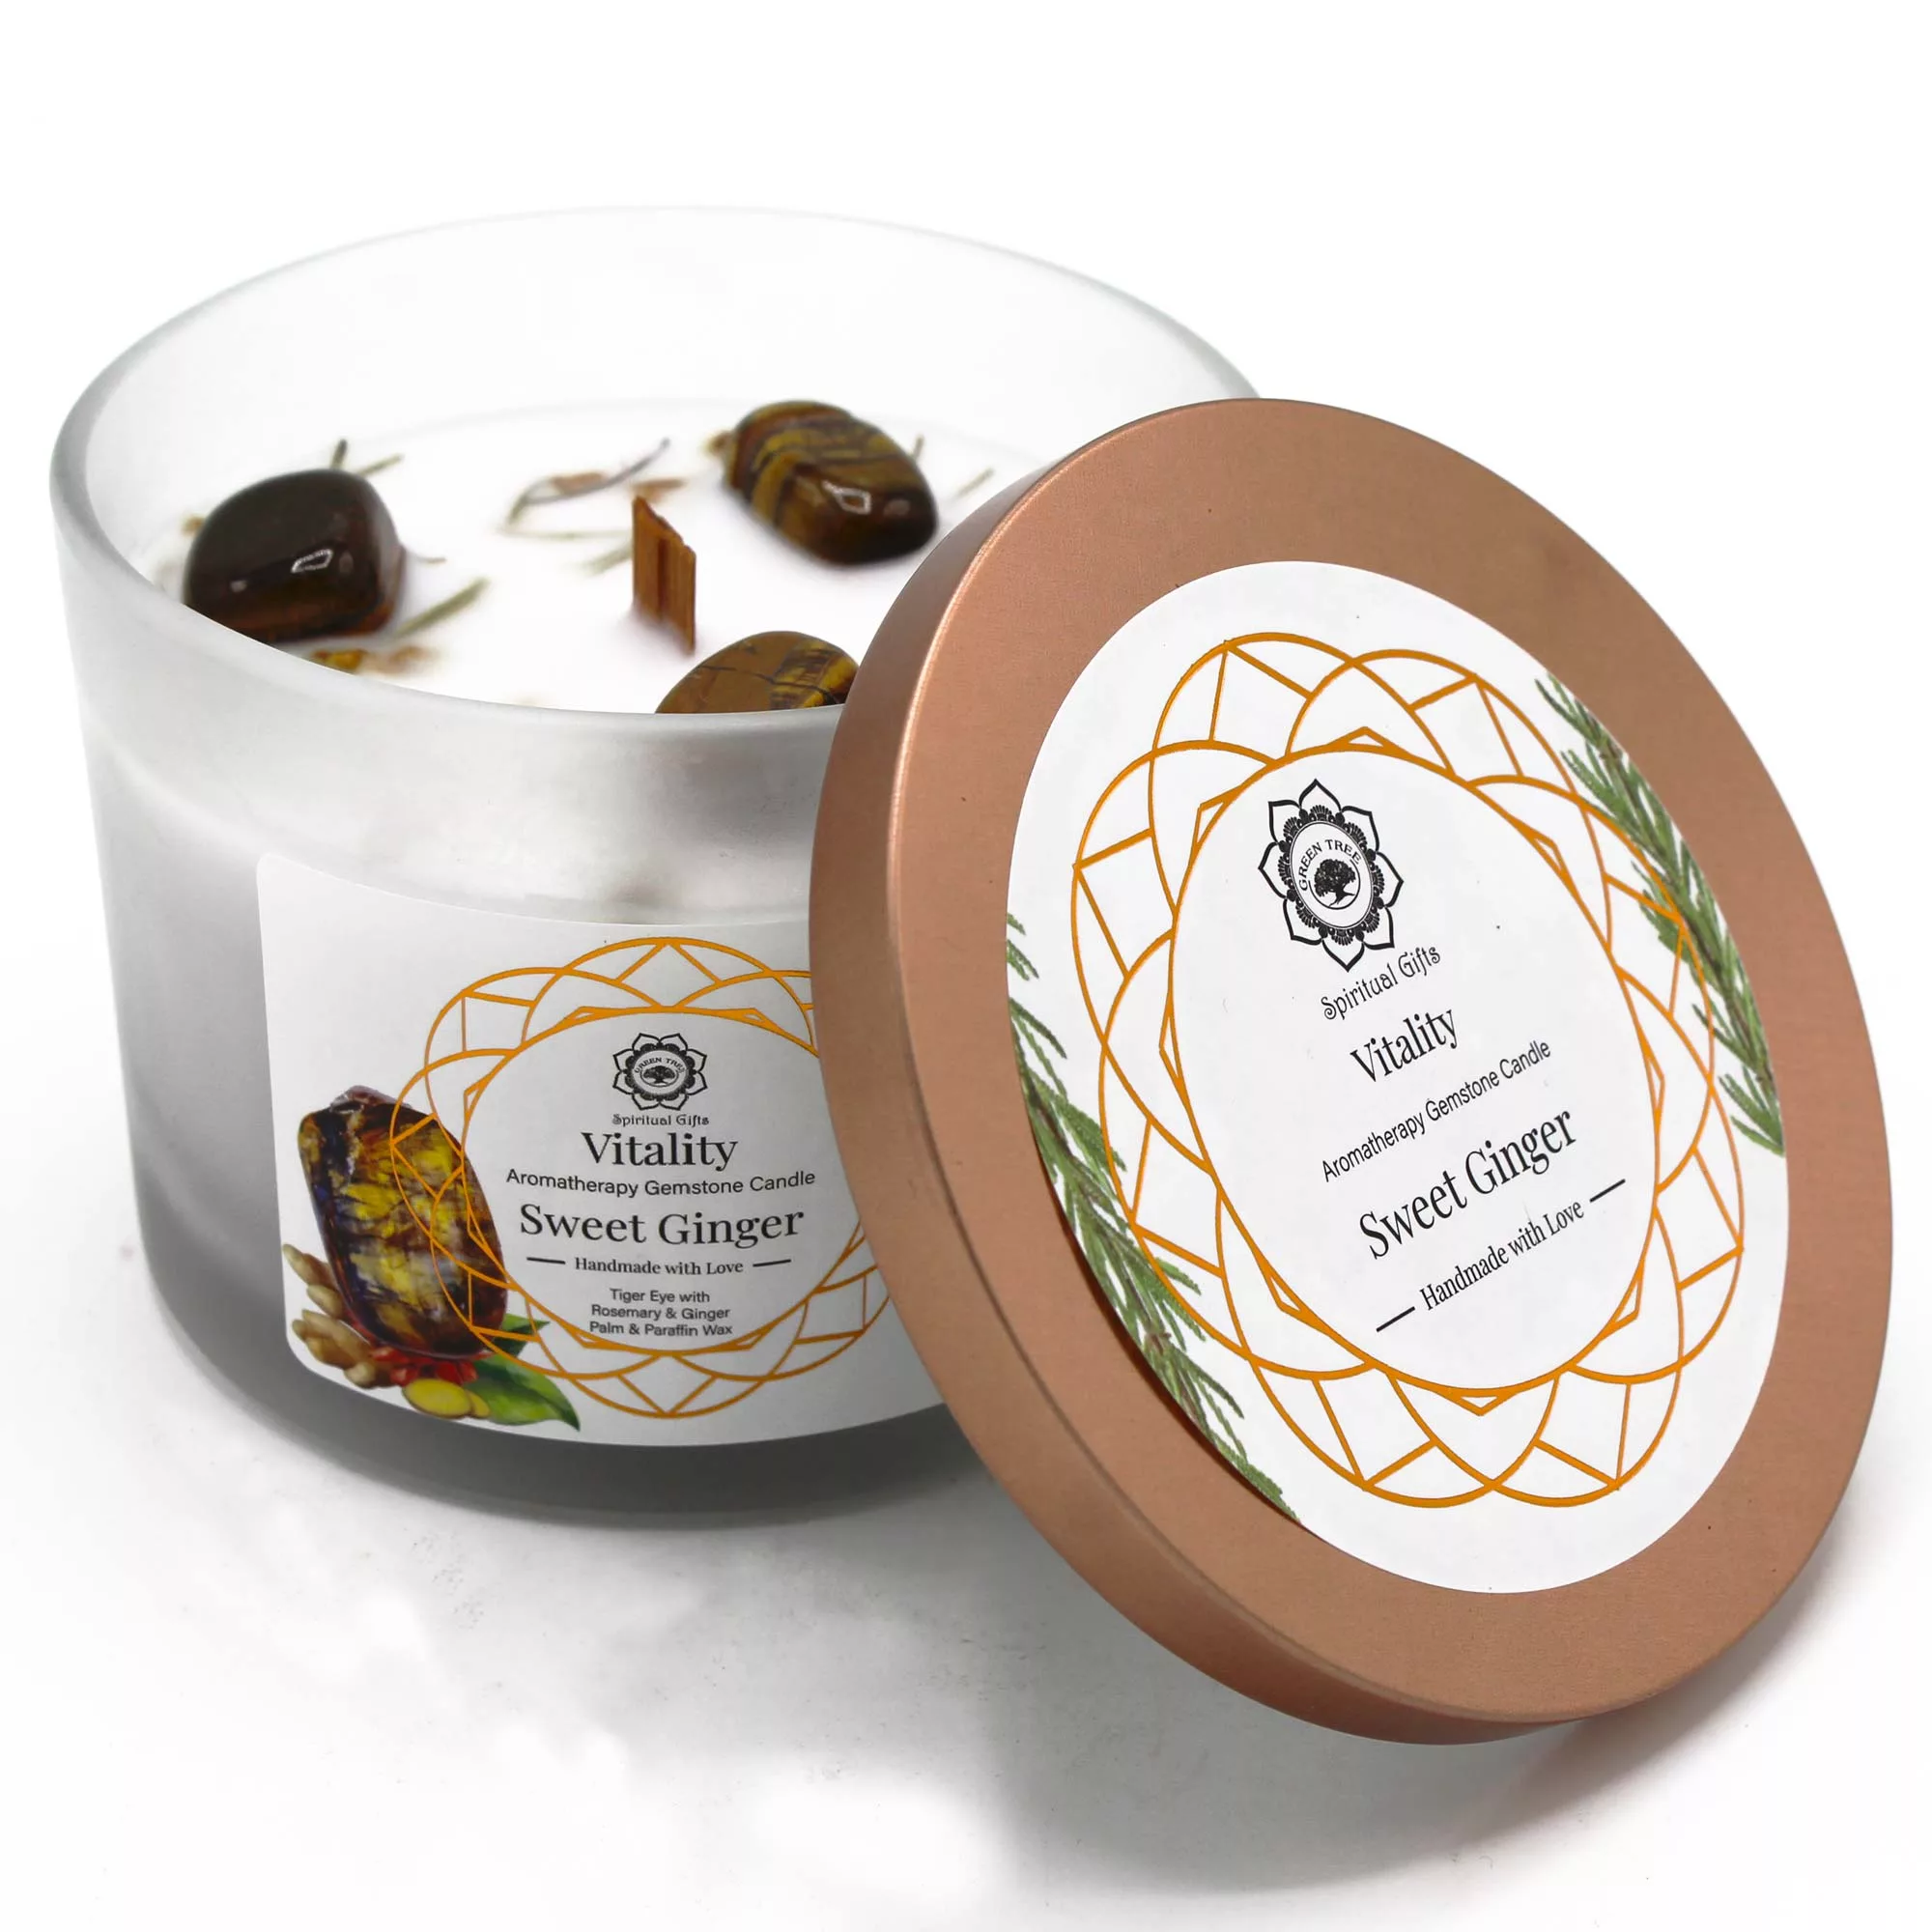 Sweet Ginger and Tiger Eye Gemstone Candle – Viality